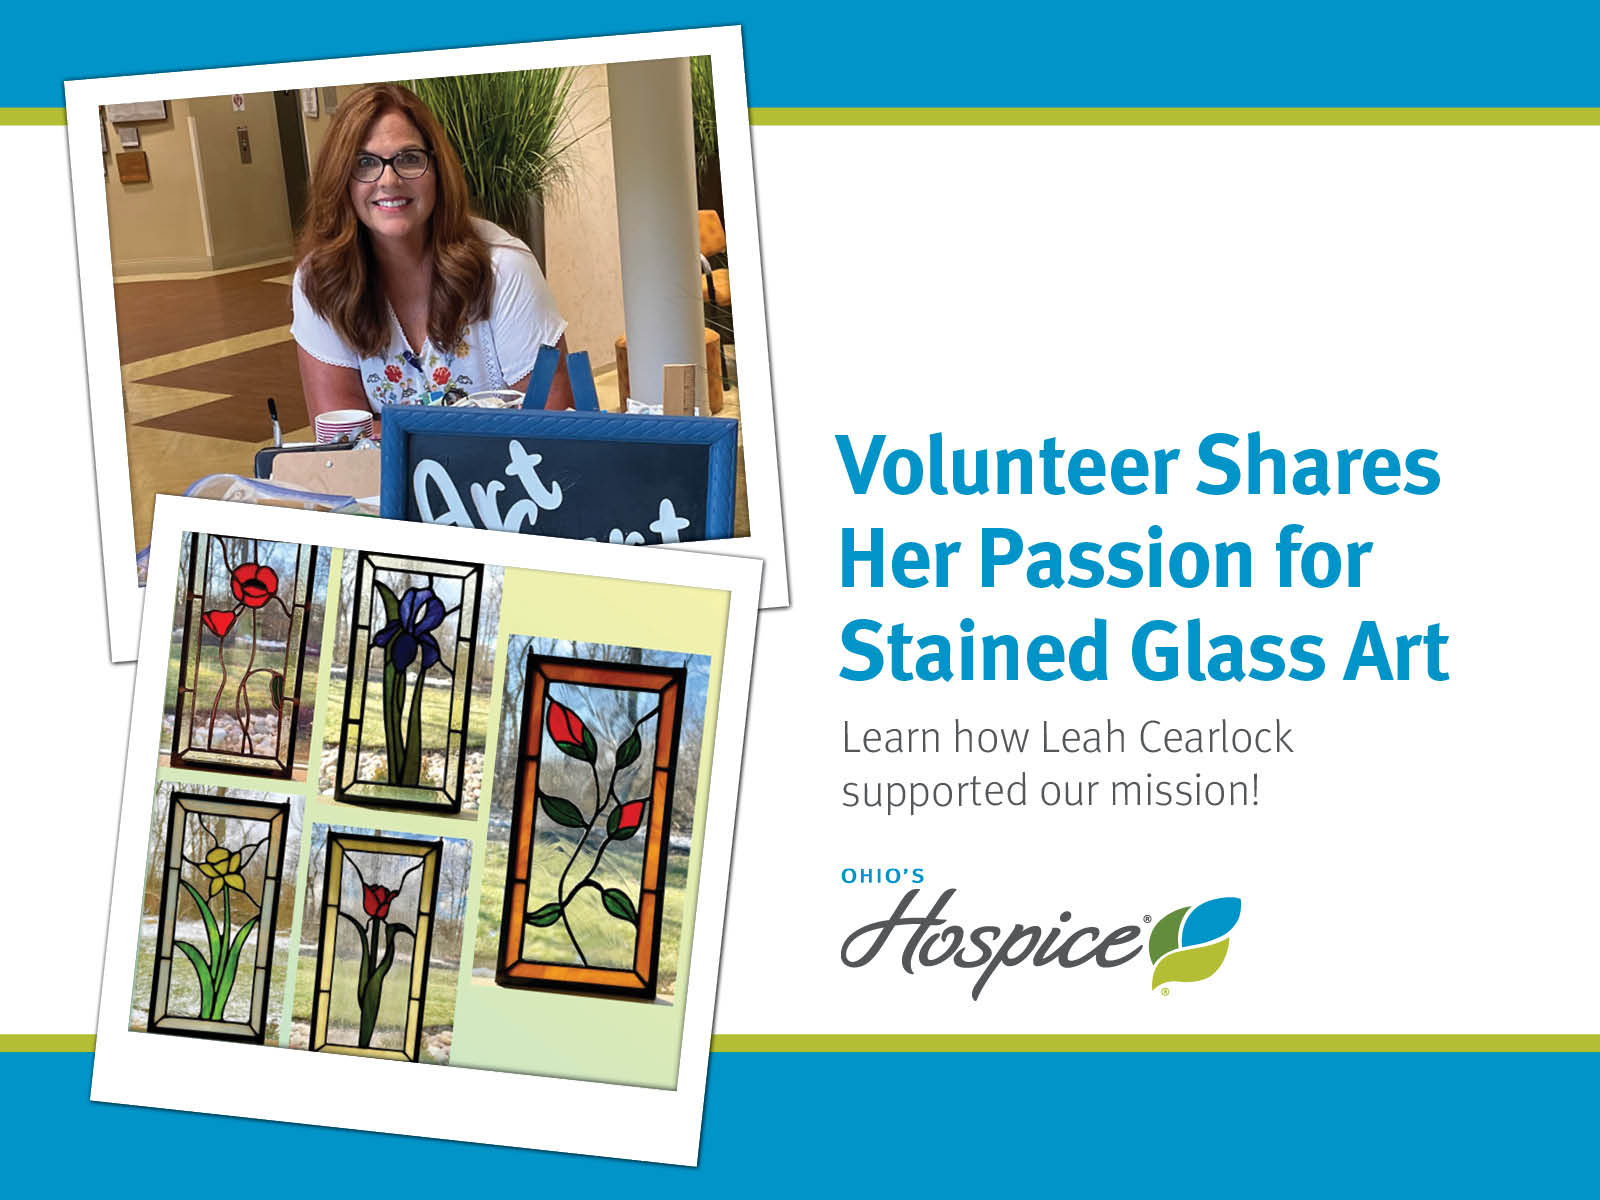 Volunteer Shares Her Passion for Stained Glass Art. Learn how Leah Cearlock supported our mission! Ohio's Hospice